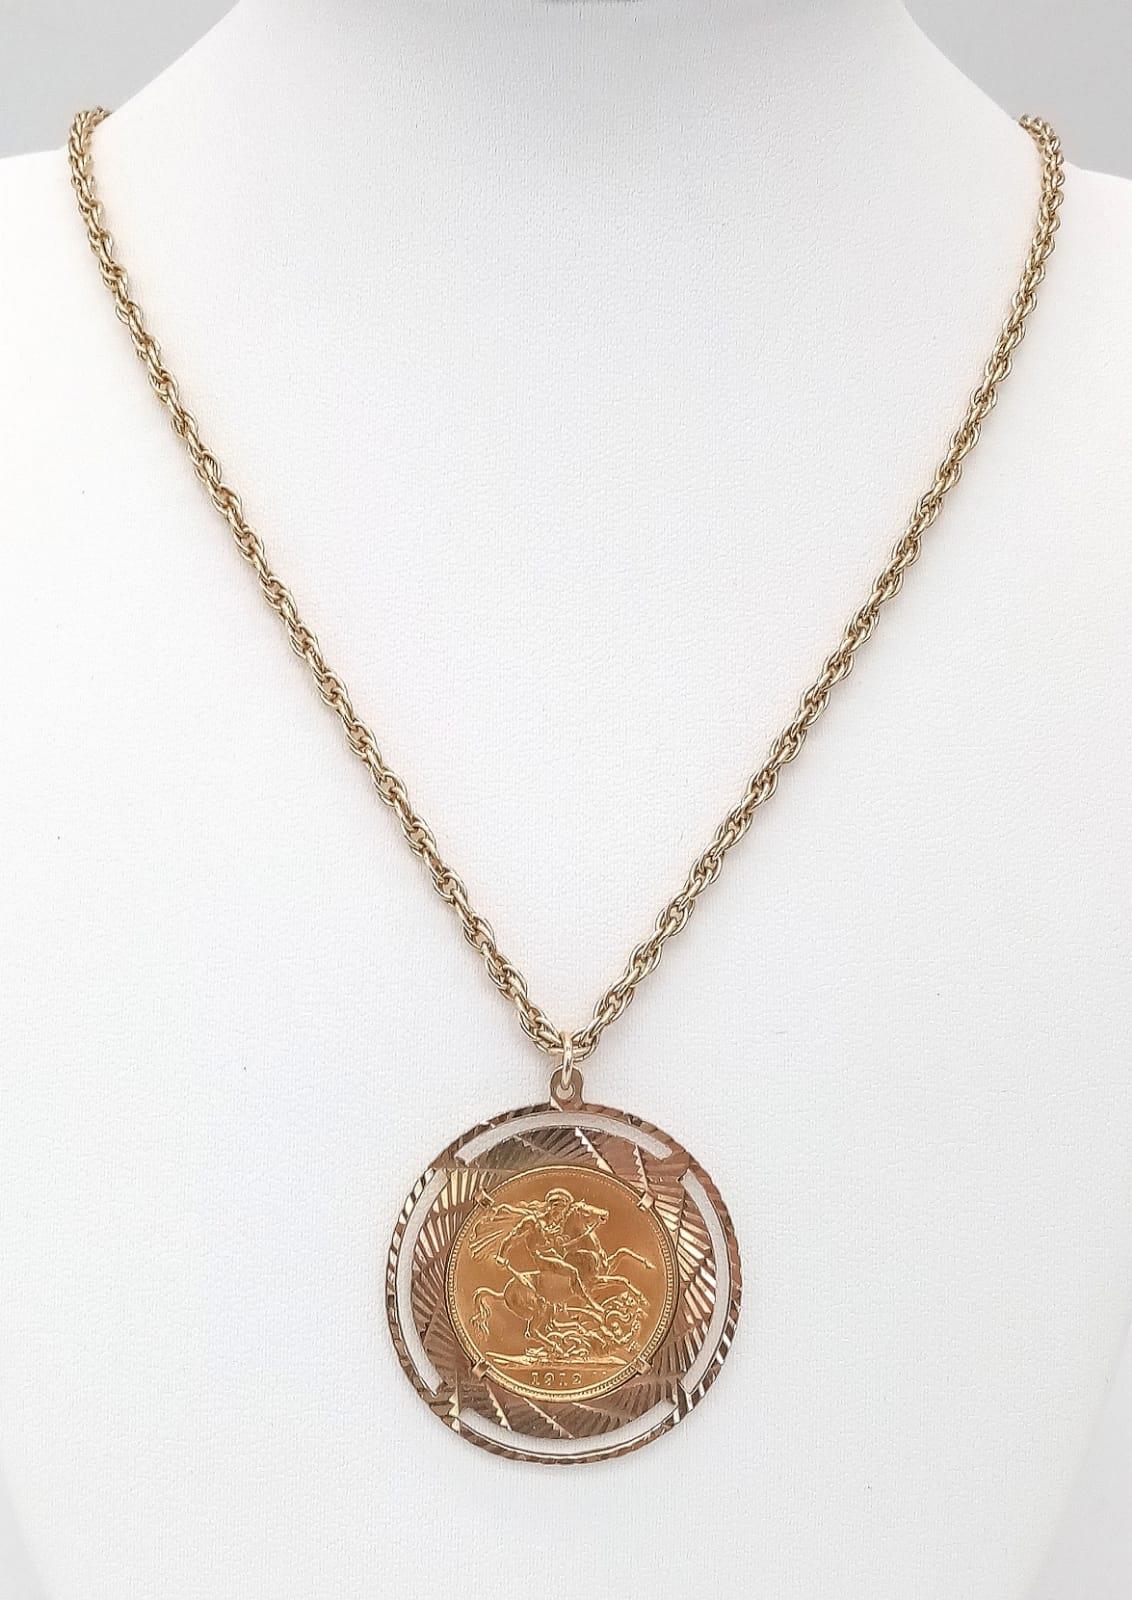 A 22K GOLD GEORGE V SOVEREIGN DATED 1912 SET IN A 9K GOLD CIRCULAR DISC WITH GEOMETRIC DESIGN AND ON